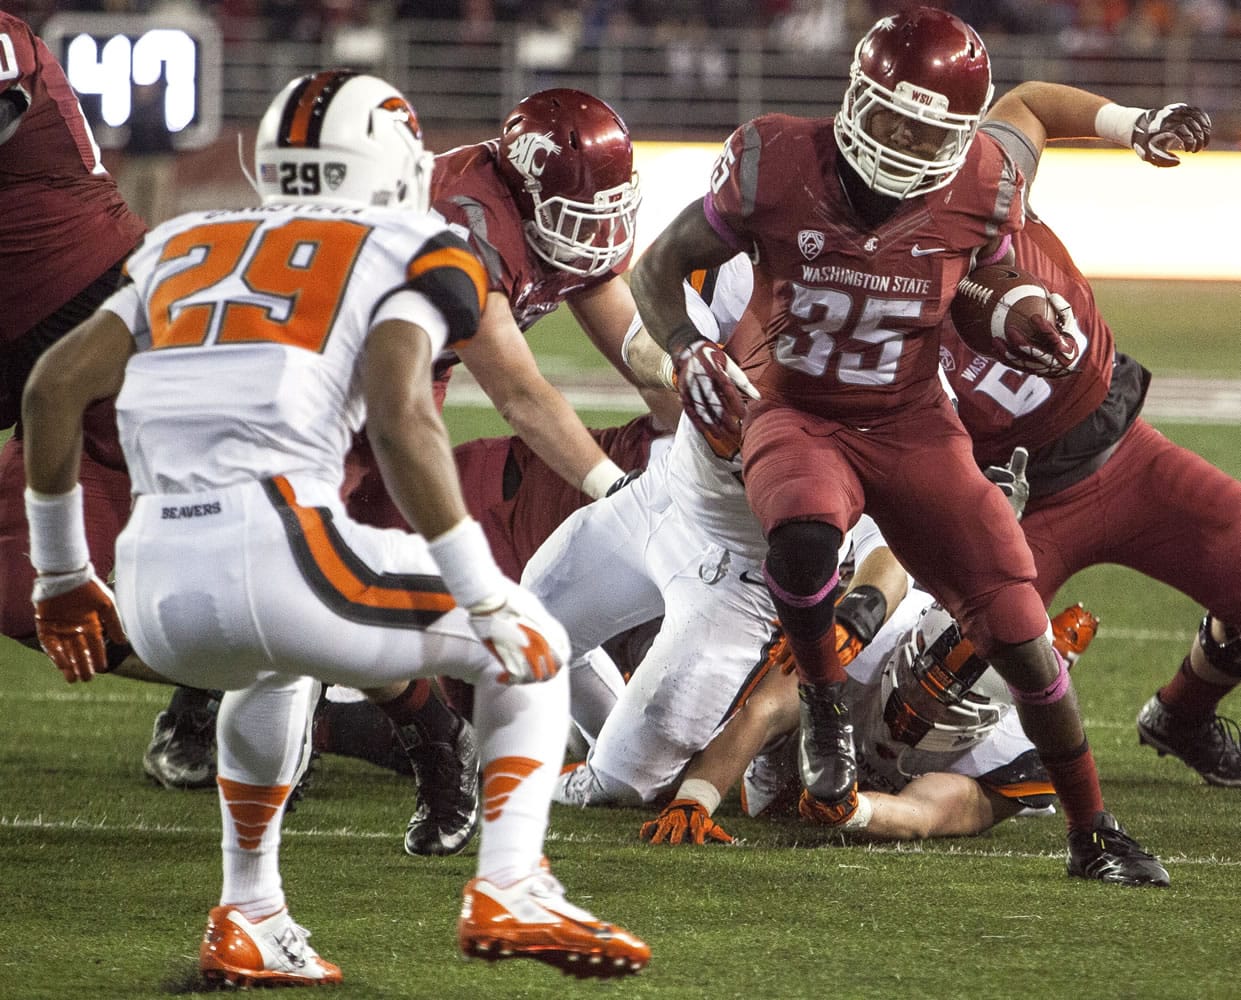 Washington State running back Marcus Mason (35) cuts inside in an effort to avoid safety Steven Christian (29) during the second half of an NCAA college football game Saturday, Oct. 12, 2013, at Martin Stadium in Pullman, Wash. Oregon State won 52-24.